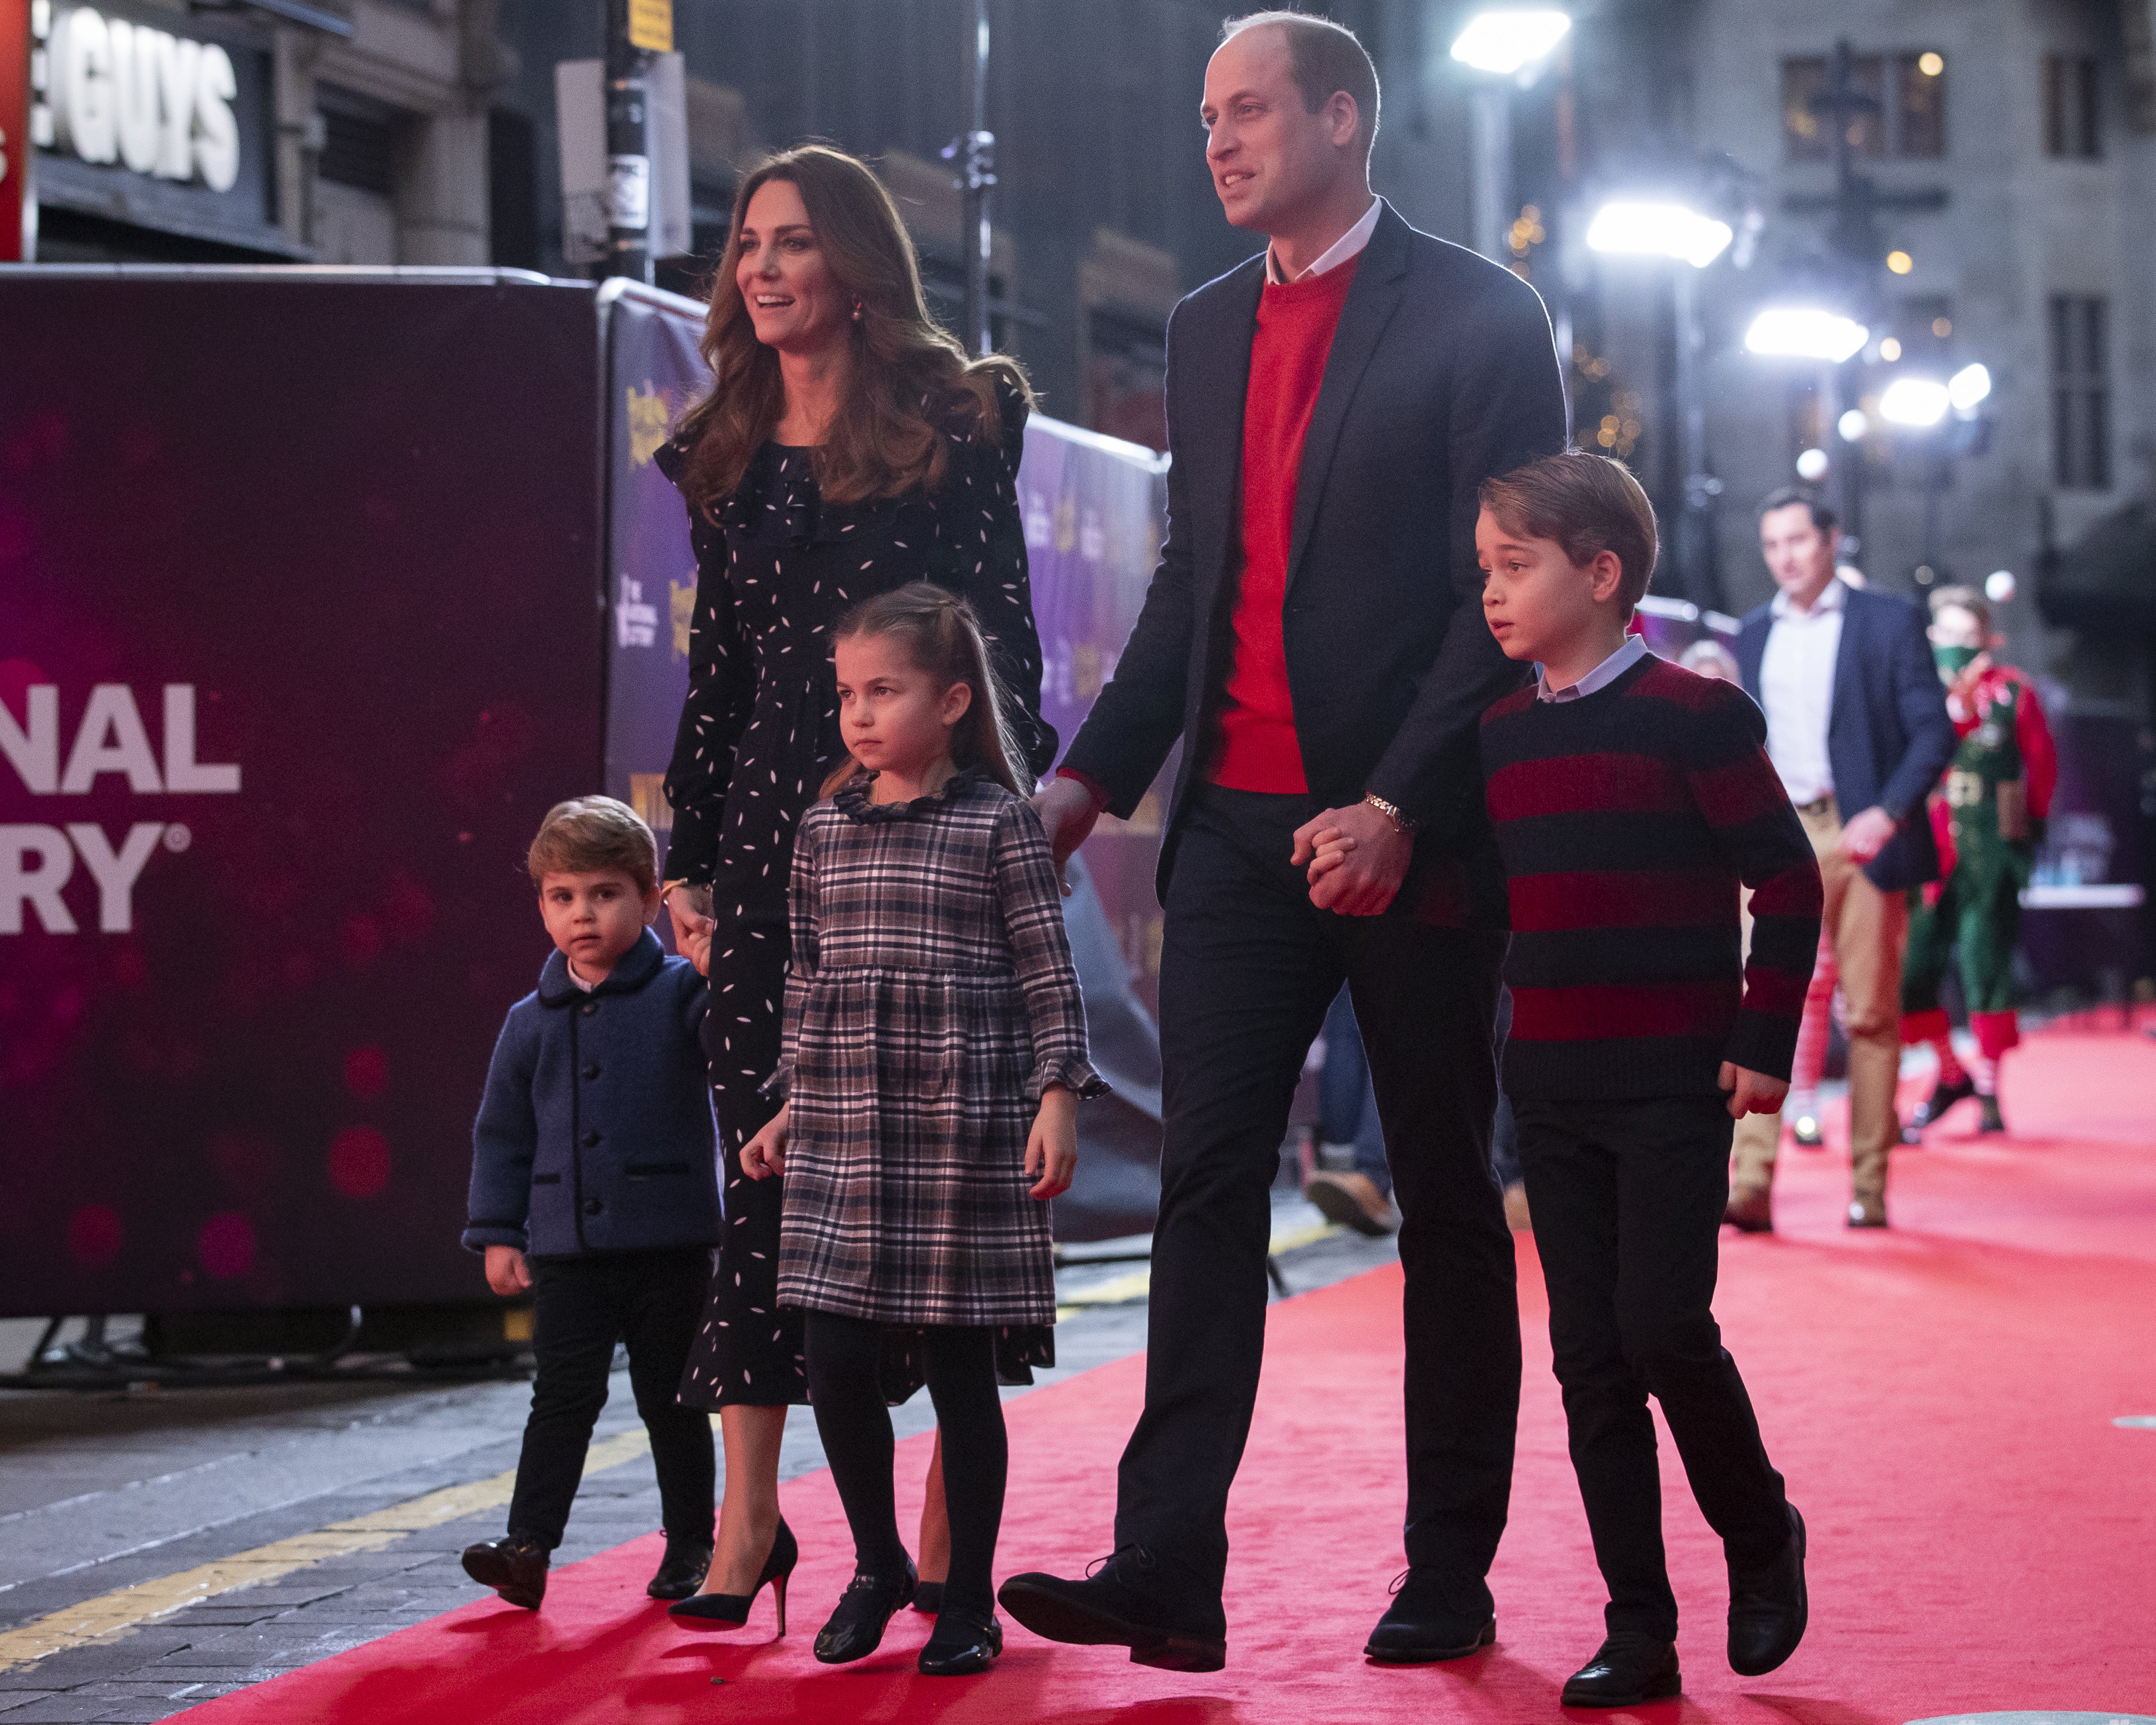 Prince William, Duke of Cambridge and Catherine, Duchess of Cambridge, with their children Prince Louis, Princess Charlotte and Prince George attend a special pantomime performance at the Palladium Theater in London, organized by the National Lottery, to thank key workers and their families for their efforts throughout the pandemic on December 11, 2020 in London, England |  Source: Getty Images